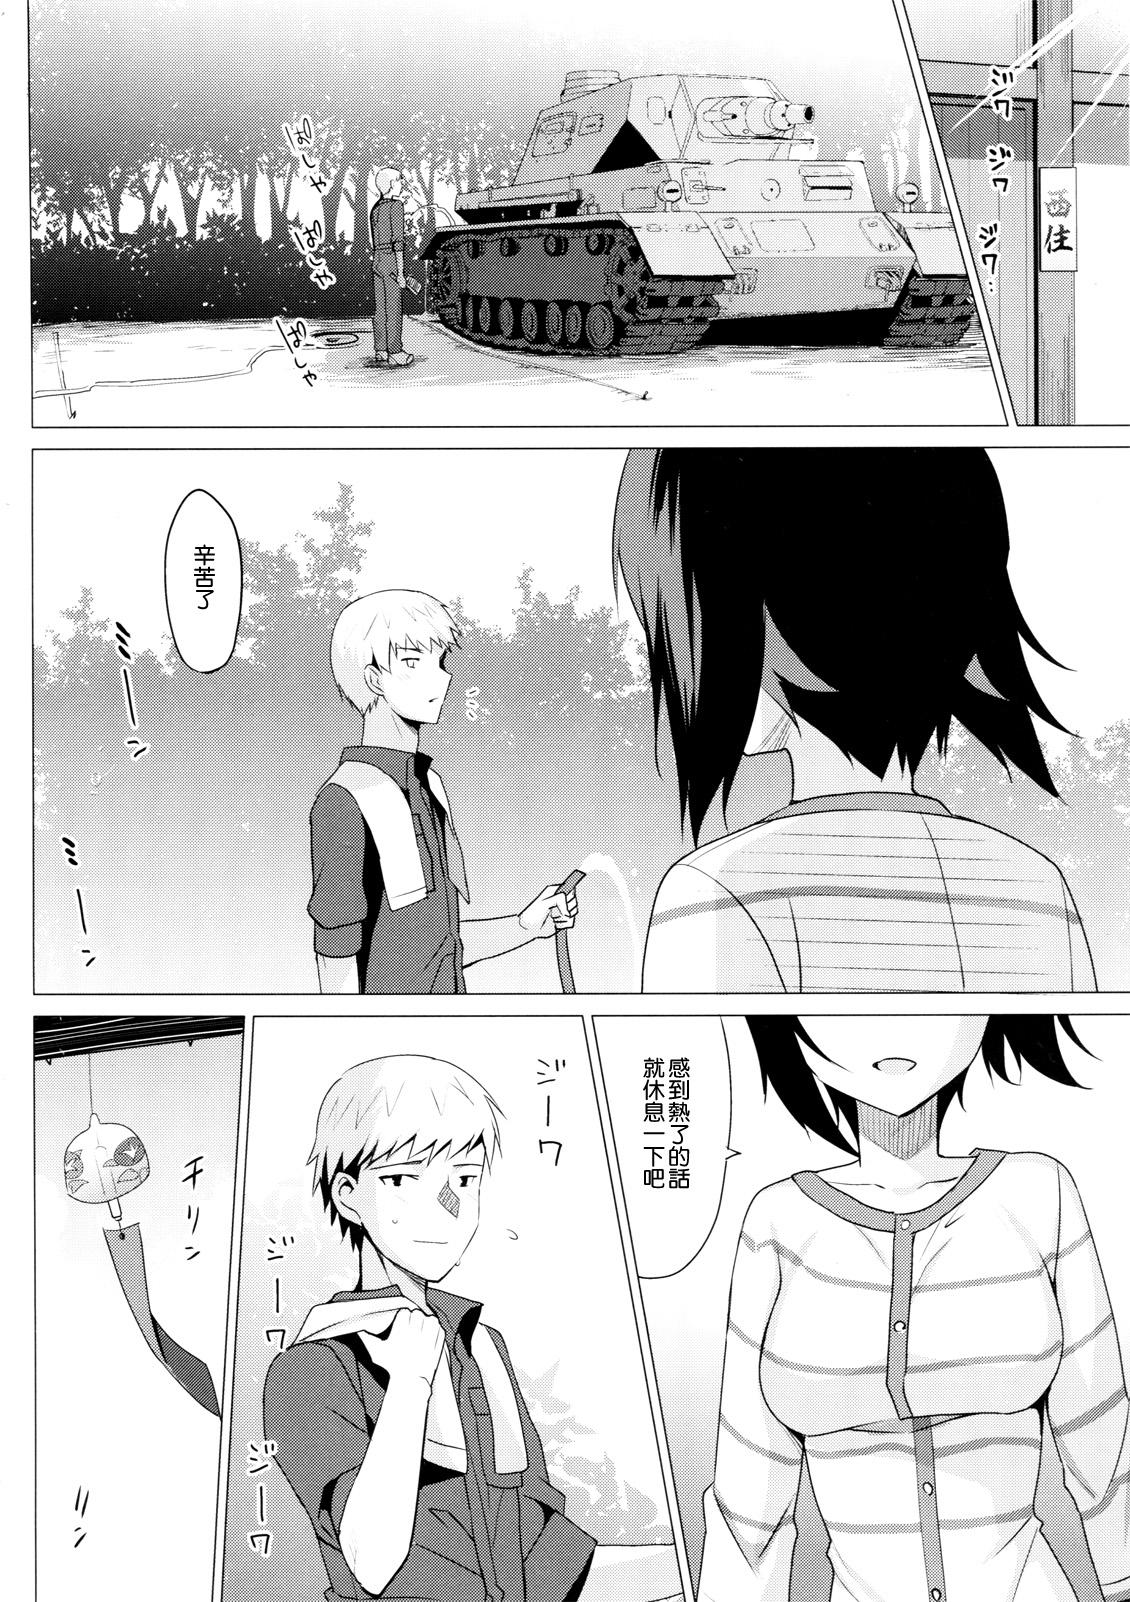 Couples LET ME LOVE YOU - Girls und panzer Gay Massage - Page 5